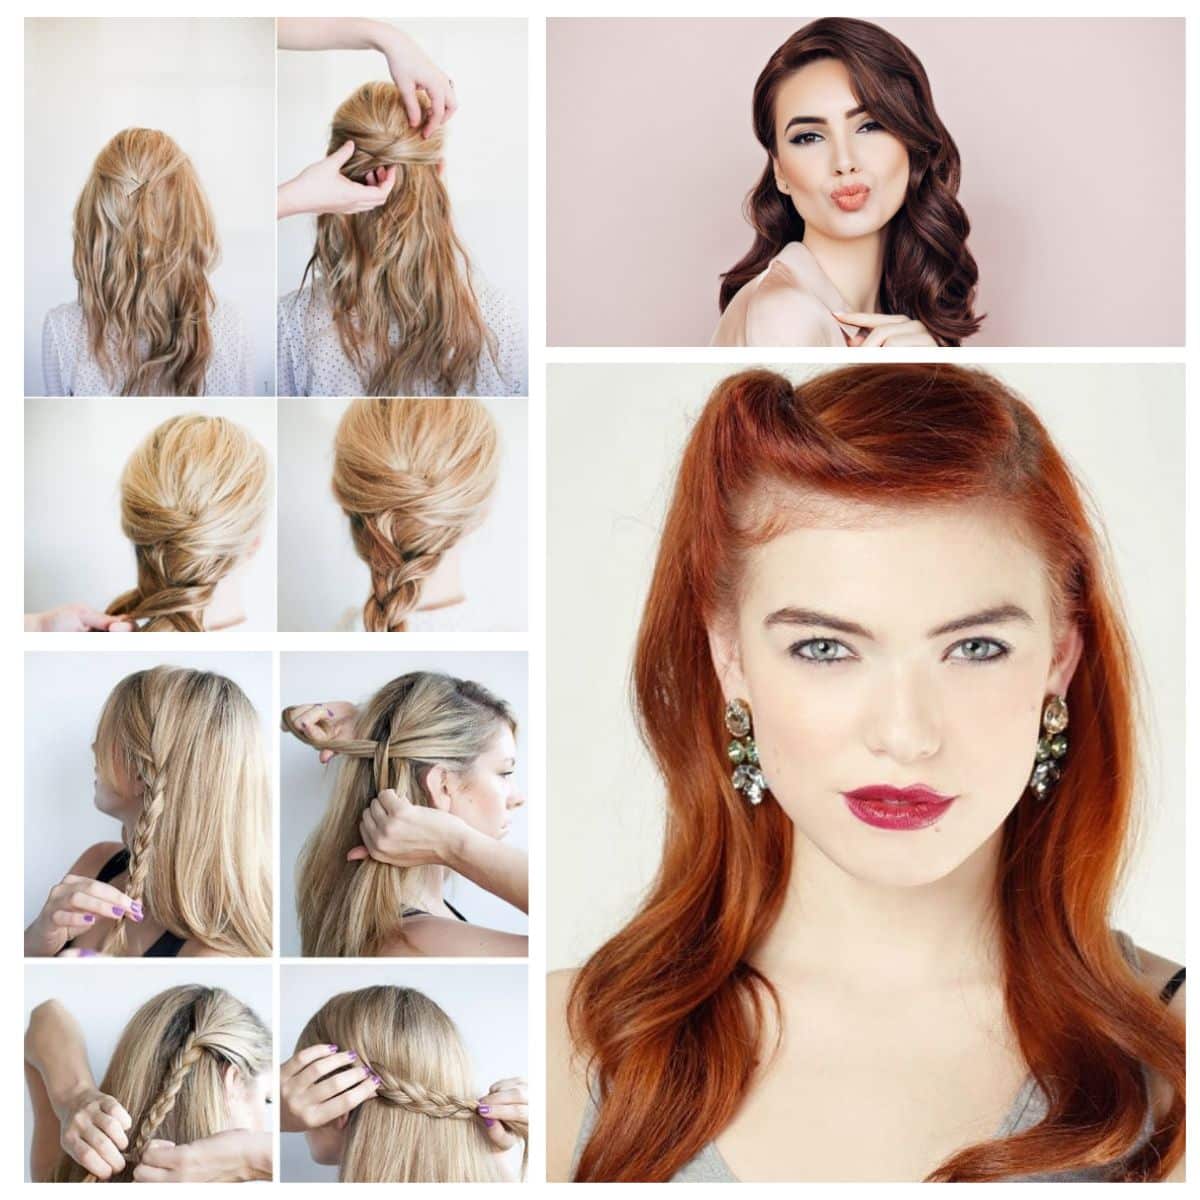 30 Easy Hairstyles for Long Hair with Simple Instructions - Hair Adviser